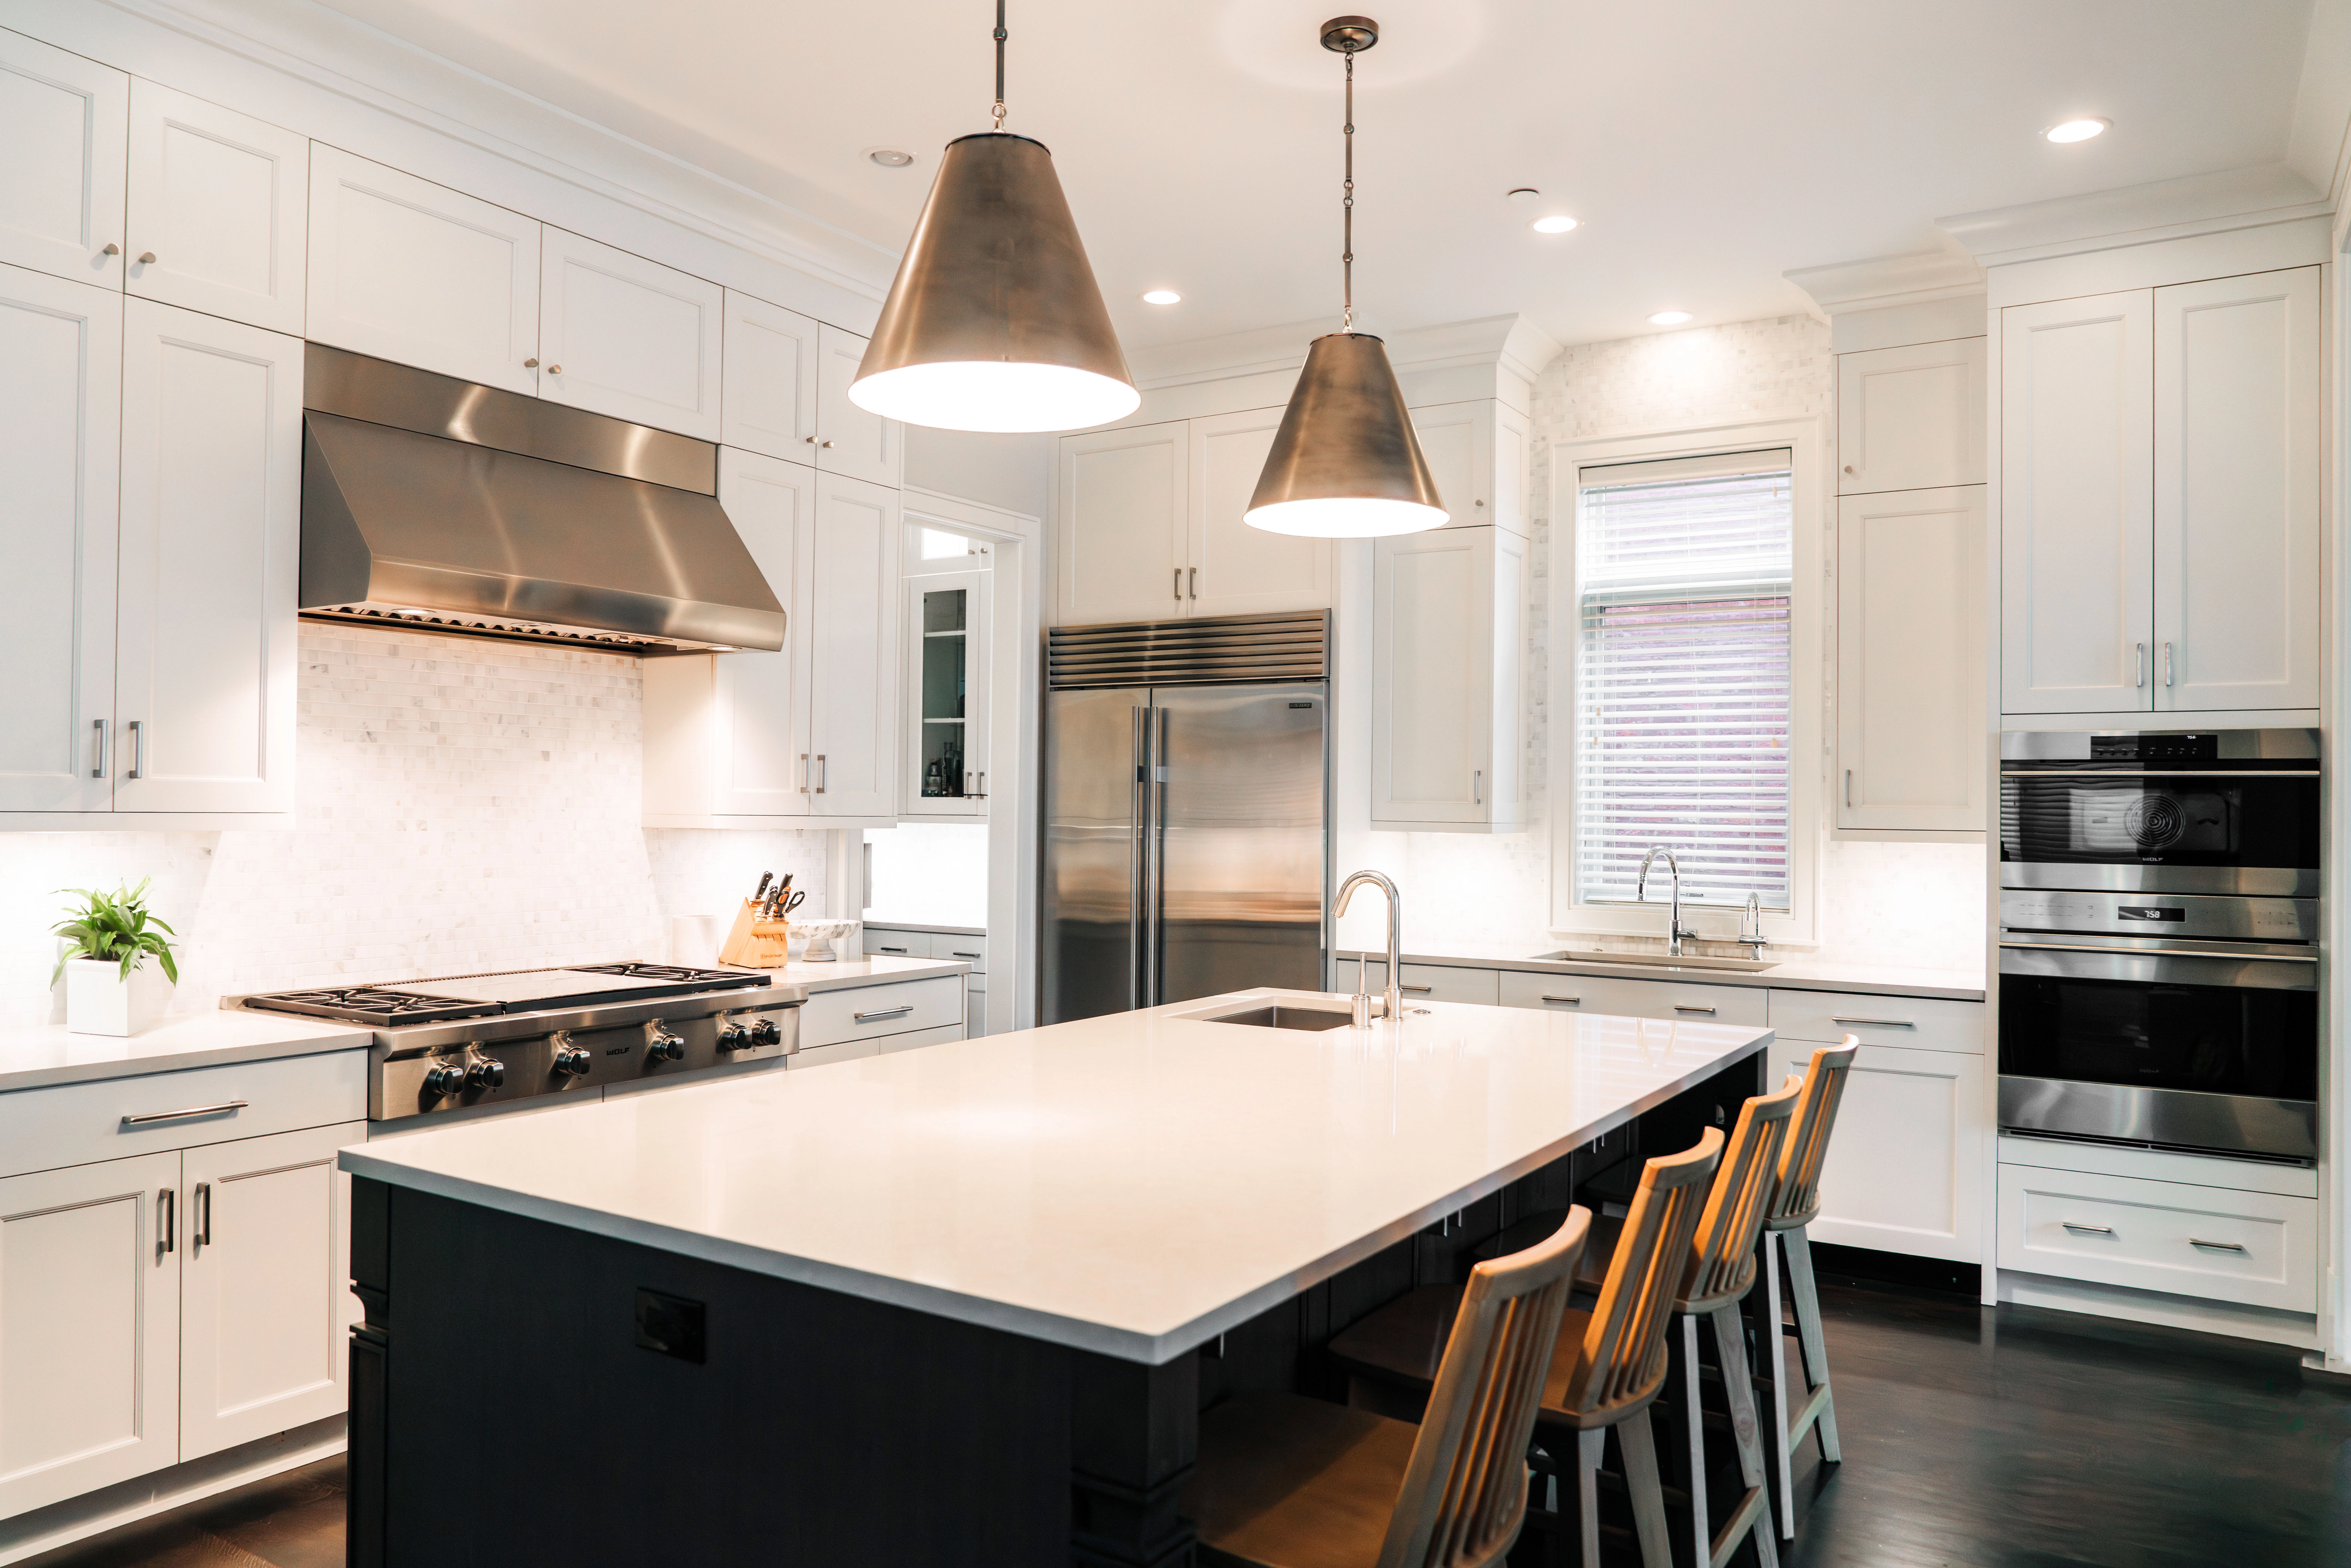 Kitchen with white cabinets, crown molding, stainless steel appliances, and island painted black.